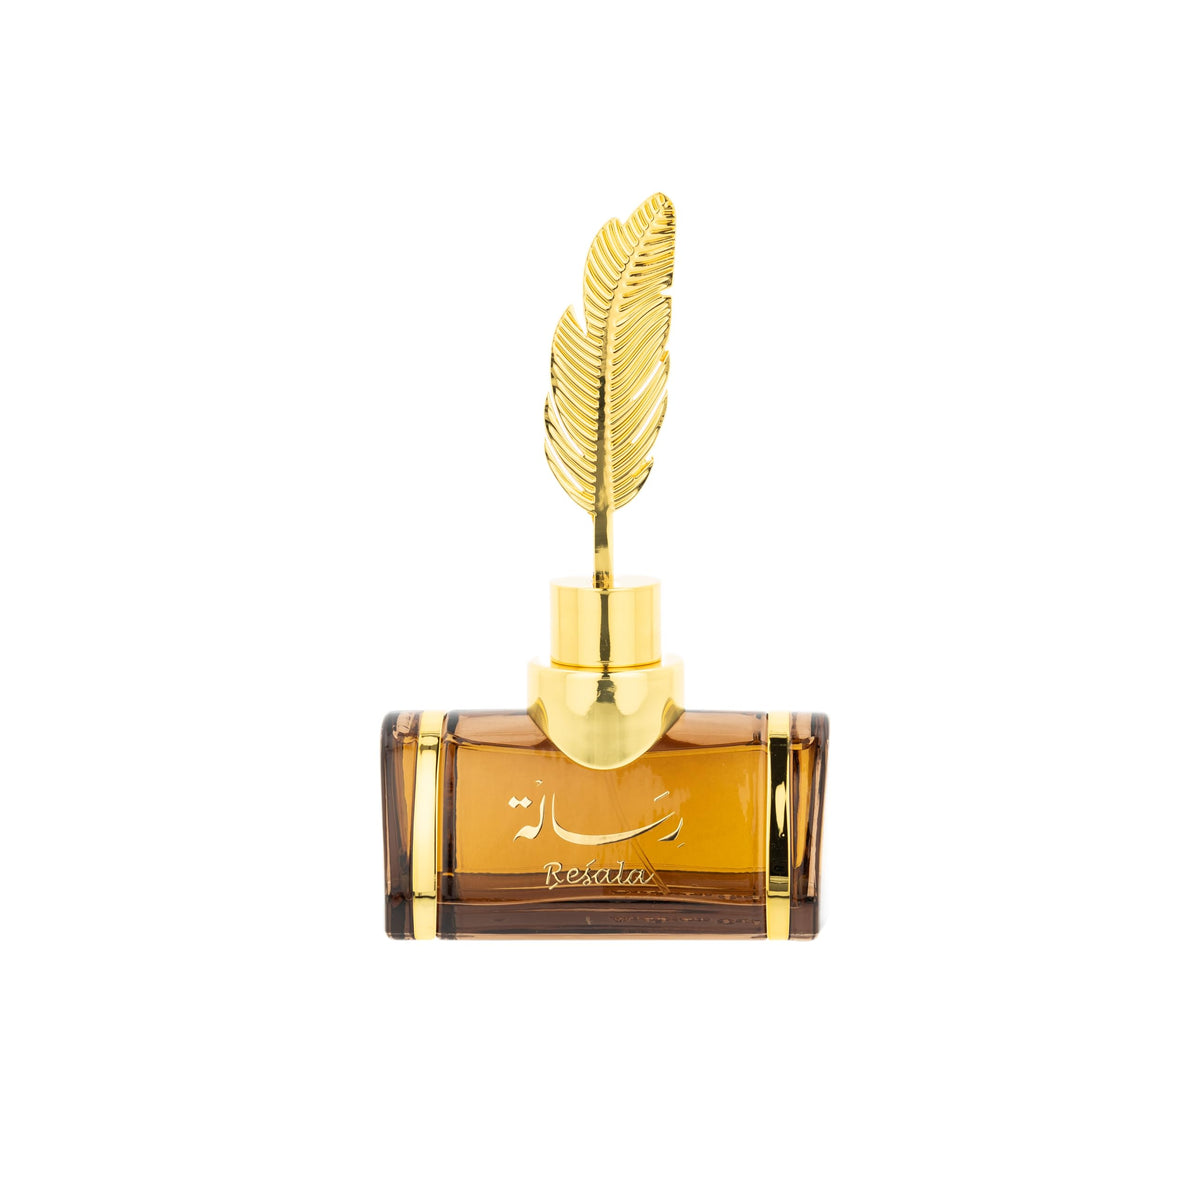 The image features an elegant, transparent amber-colored perfume bottle with a distinctive golden feather as its cap. The bottle has a robust, rectangular shape with rounded shoulders, and a gold neck that supports the feather-shaped cap, adding a luxurious touch to the design. On the front of the bottle, there is script text which appears to be a brand or perfume name, possibly in Arabic, and the word "Resala" in a stylized font.